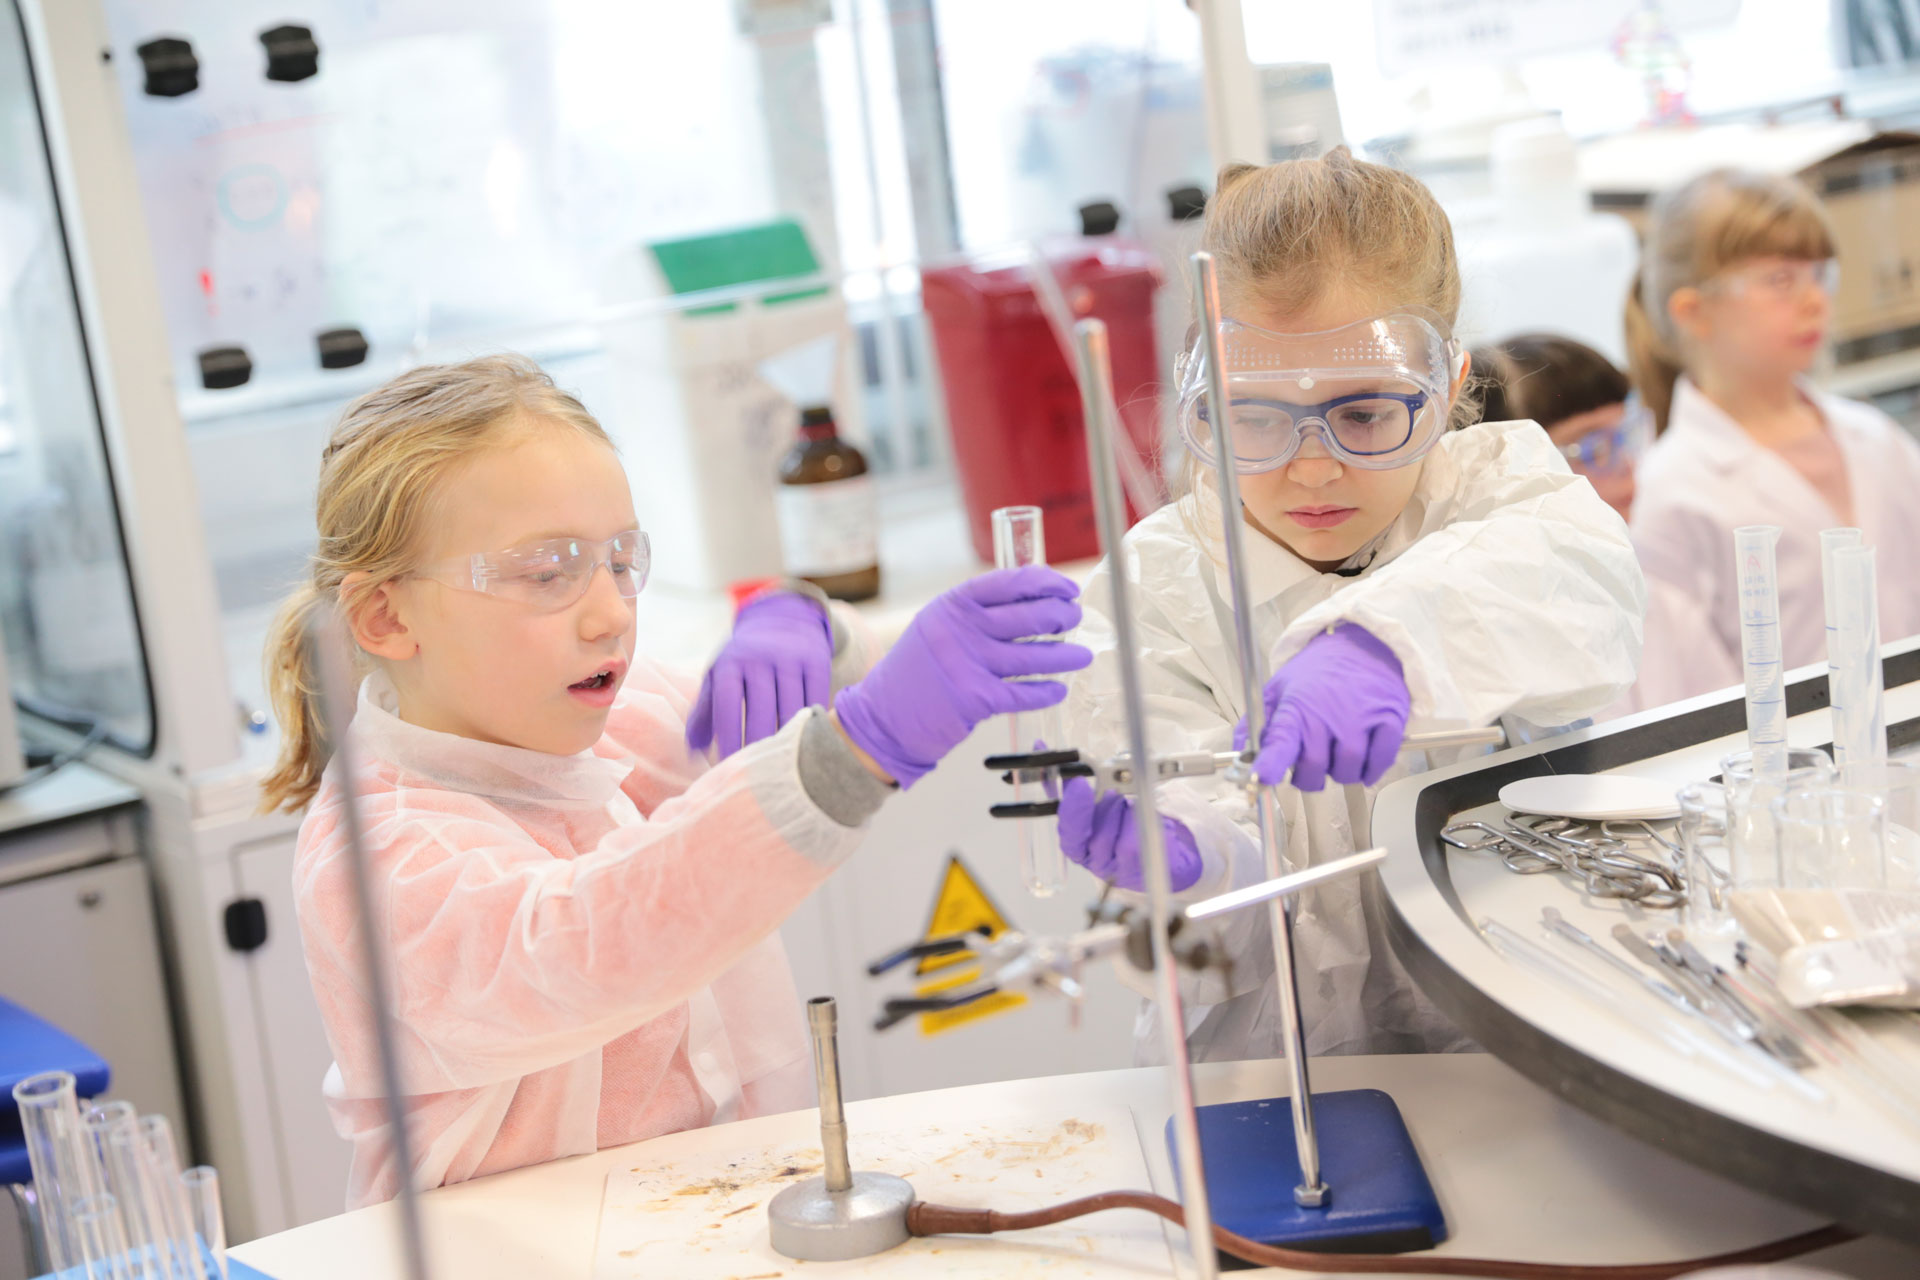 Advanced Science camps for children aged 9-14 with Richer Education in London